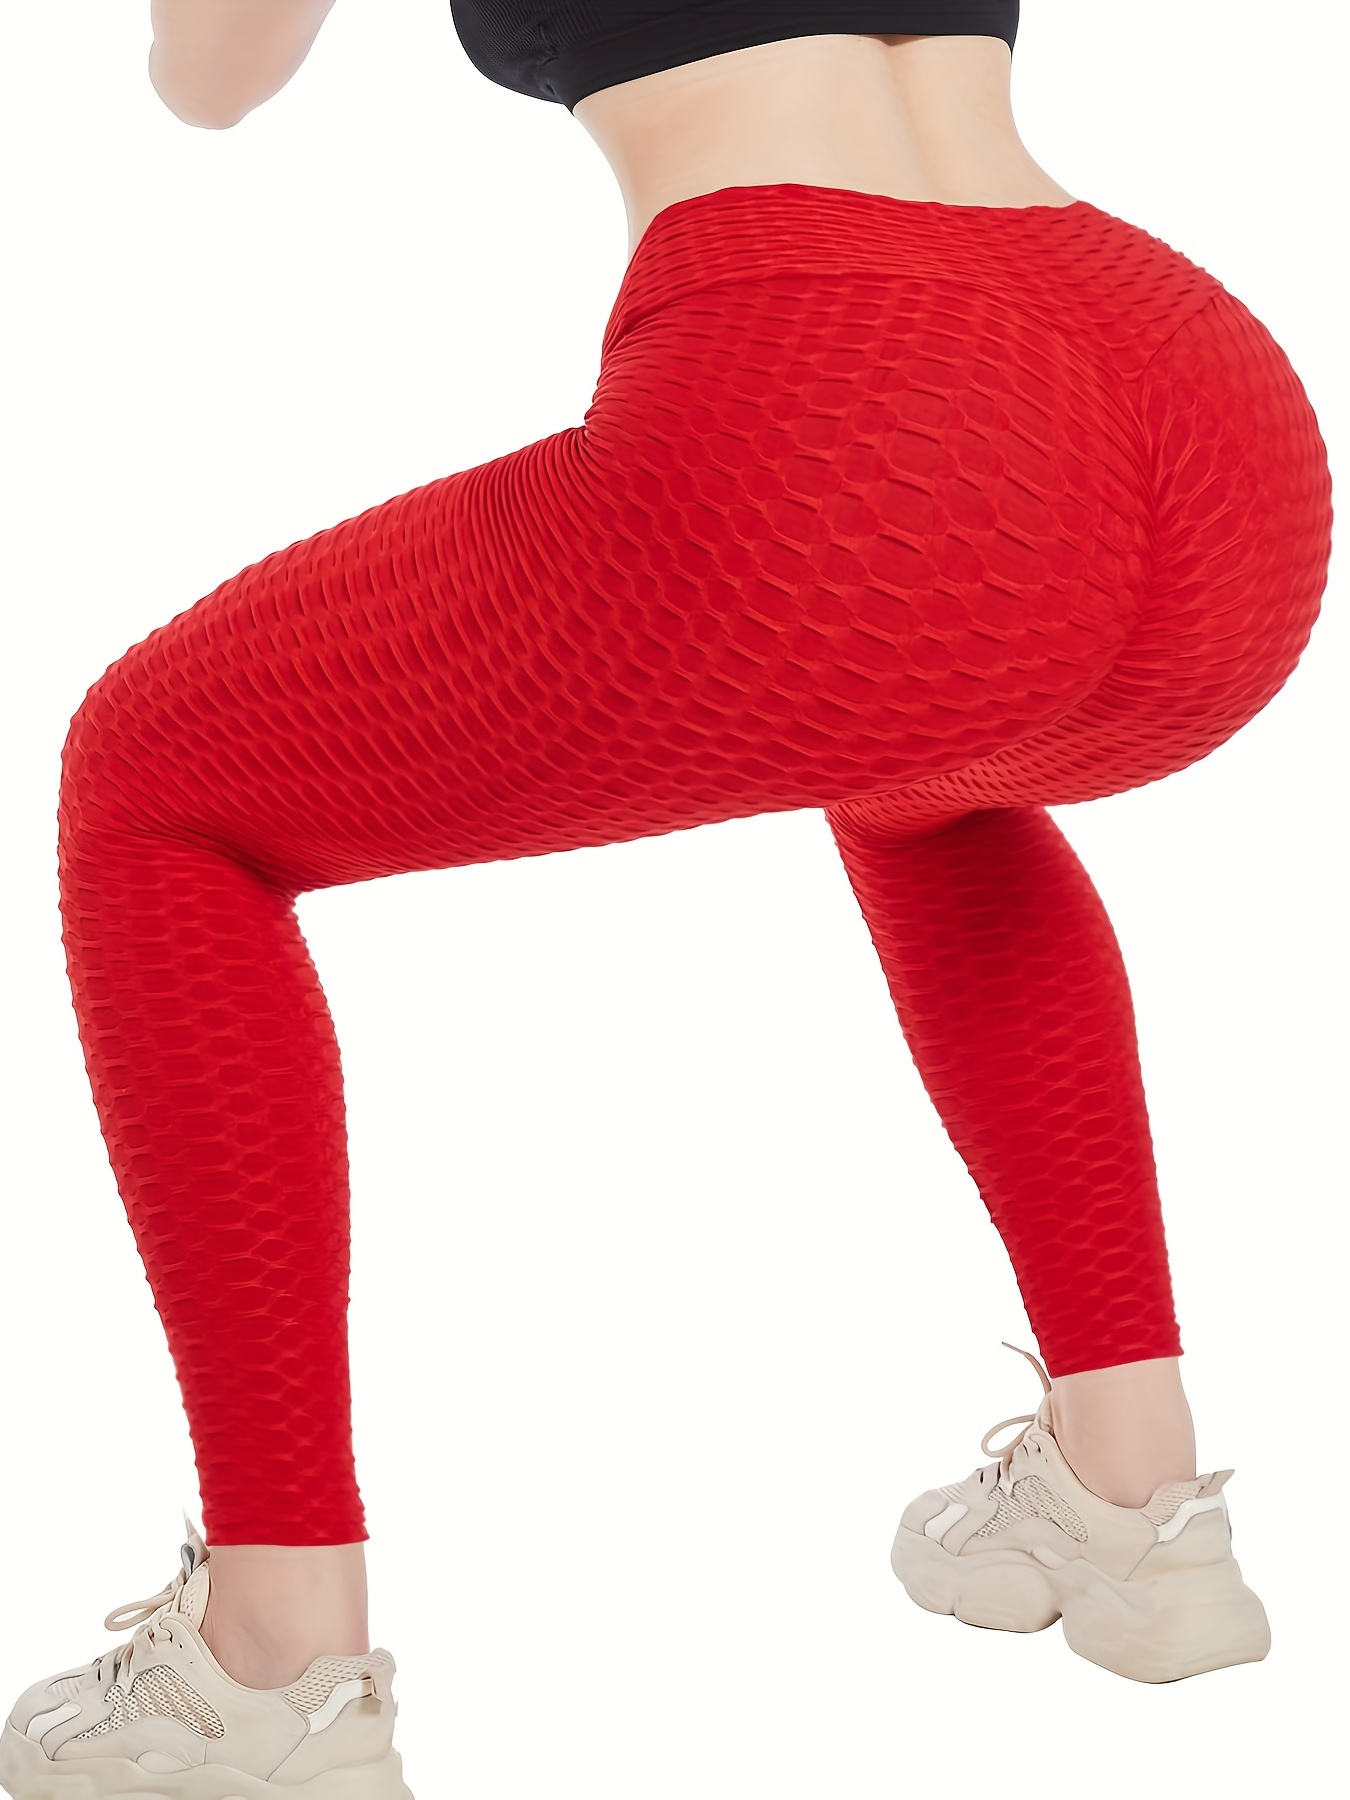  Womens High Waist Yoga Pants Tummy Control Scrunched Booty  Capri Leggings Workout Running Butt Lift Textured Tights Red Large